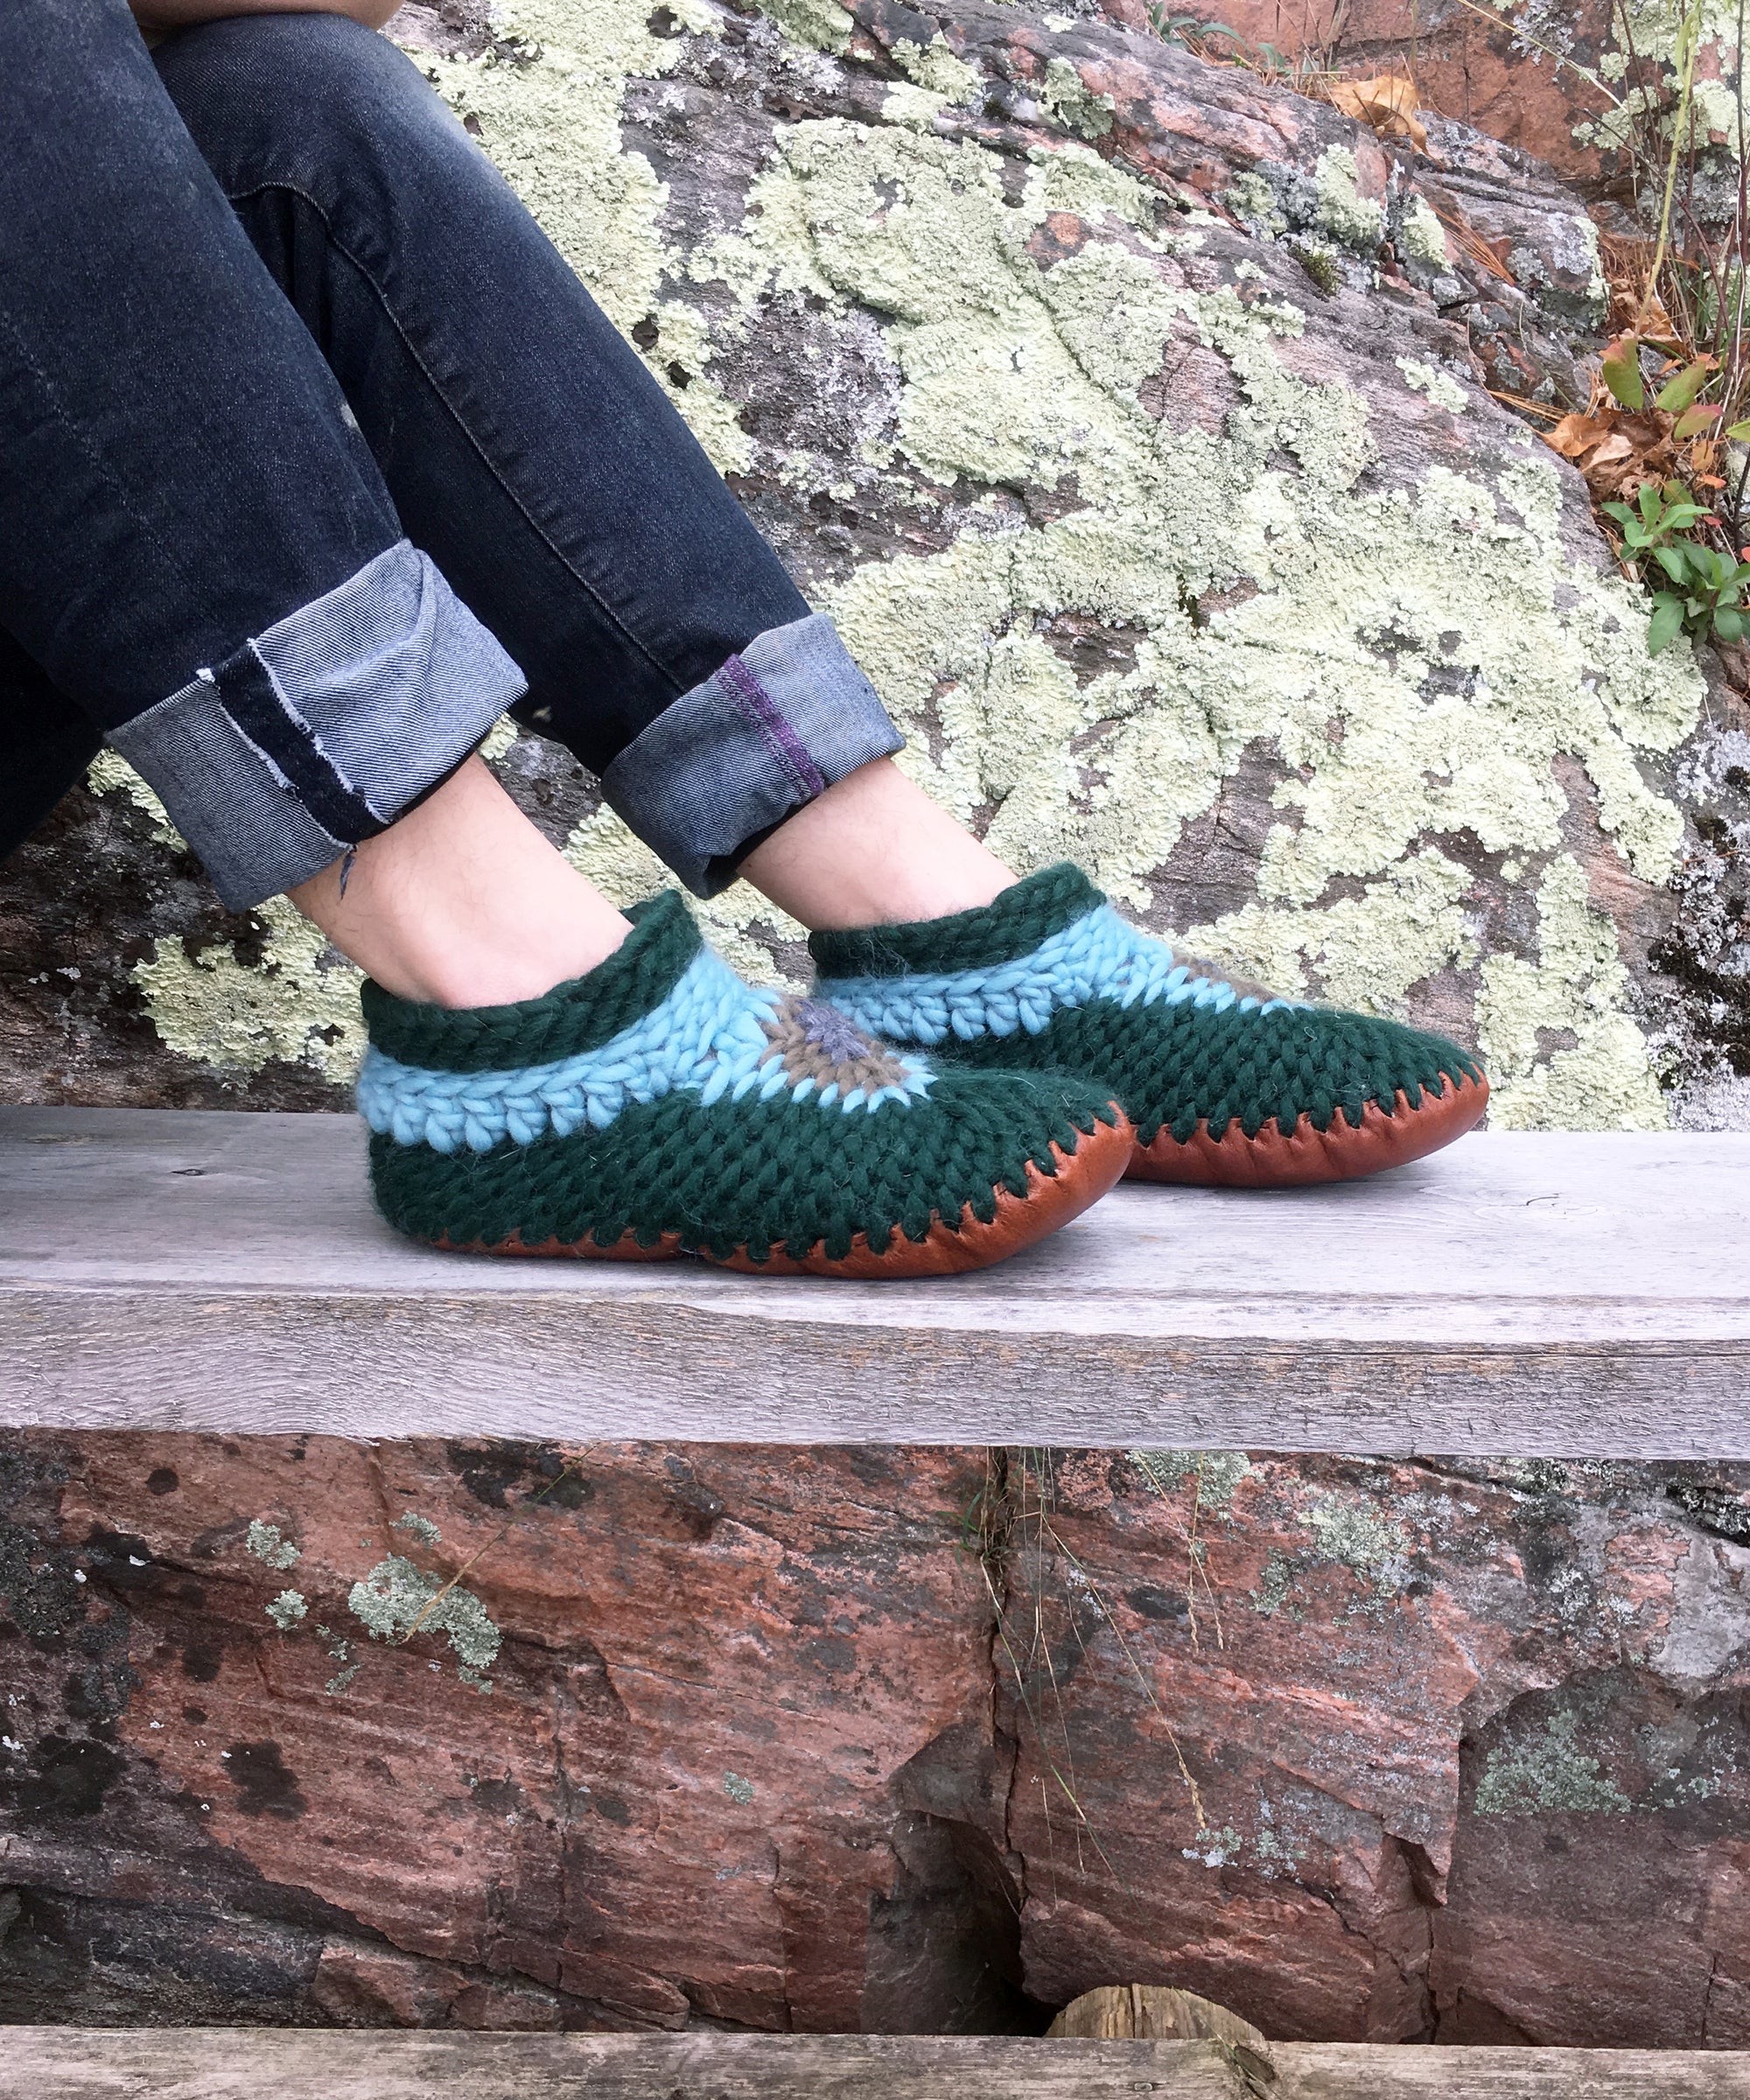 Sustainable Slippers Men, Eco Slippers Women, Merino Wool Shoes with Leather Sole, Fur Lined Booties made in Canada